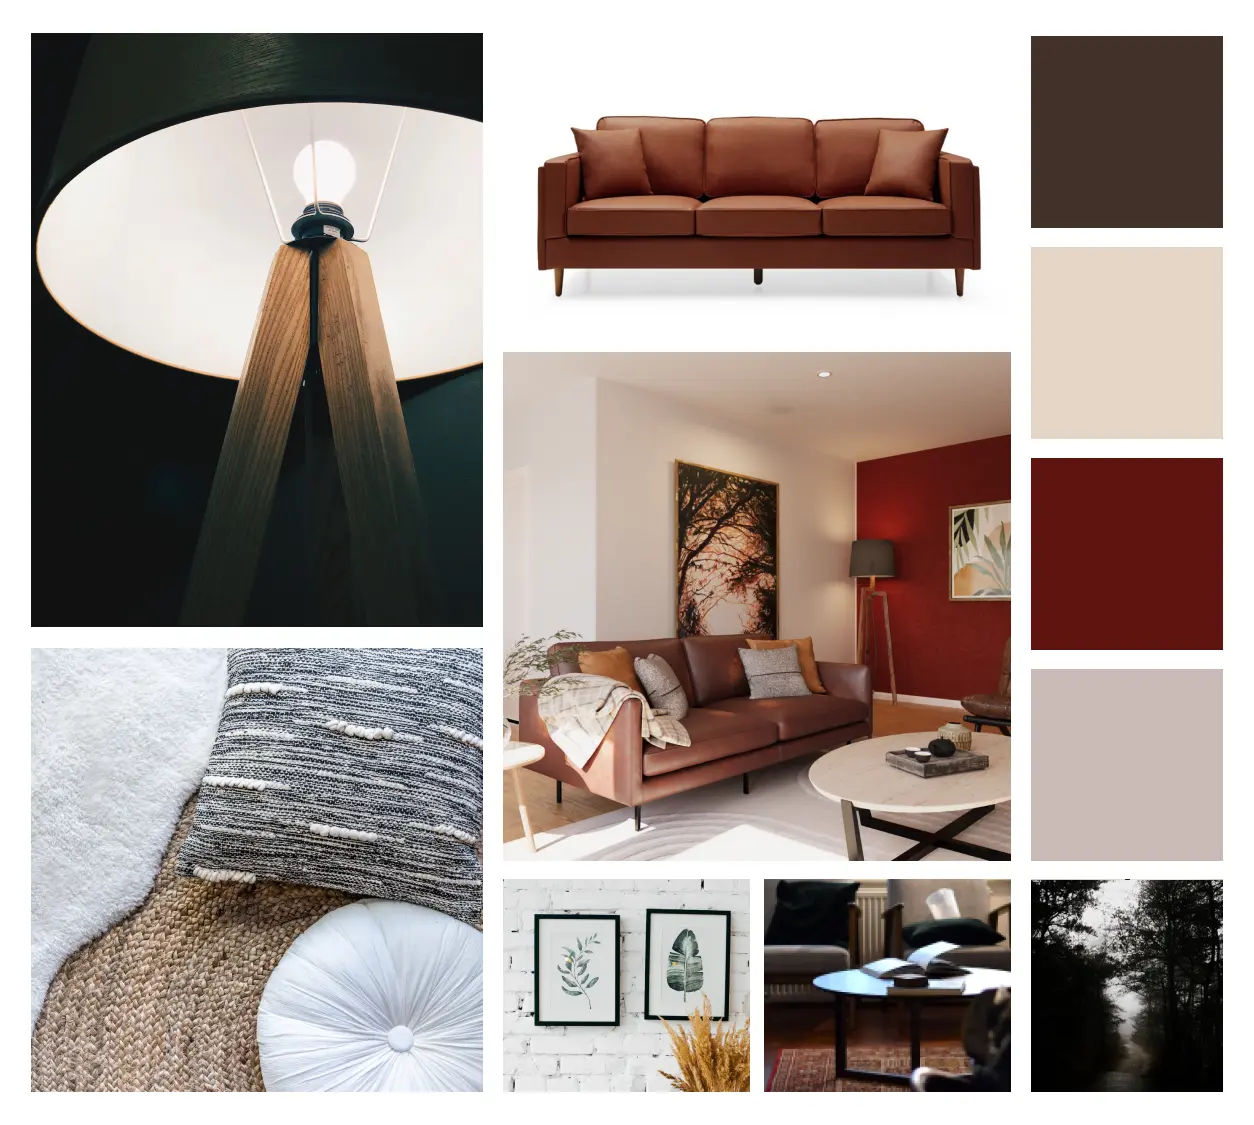 A moodboard showing a living room and the different elements and colors it uses.